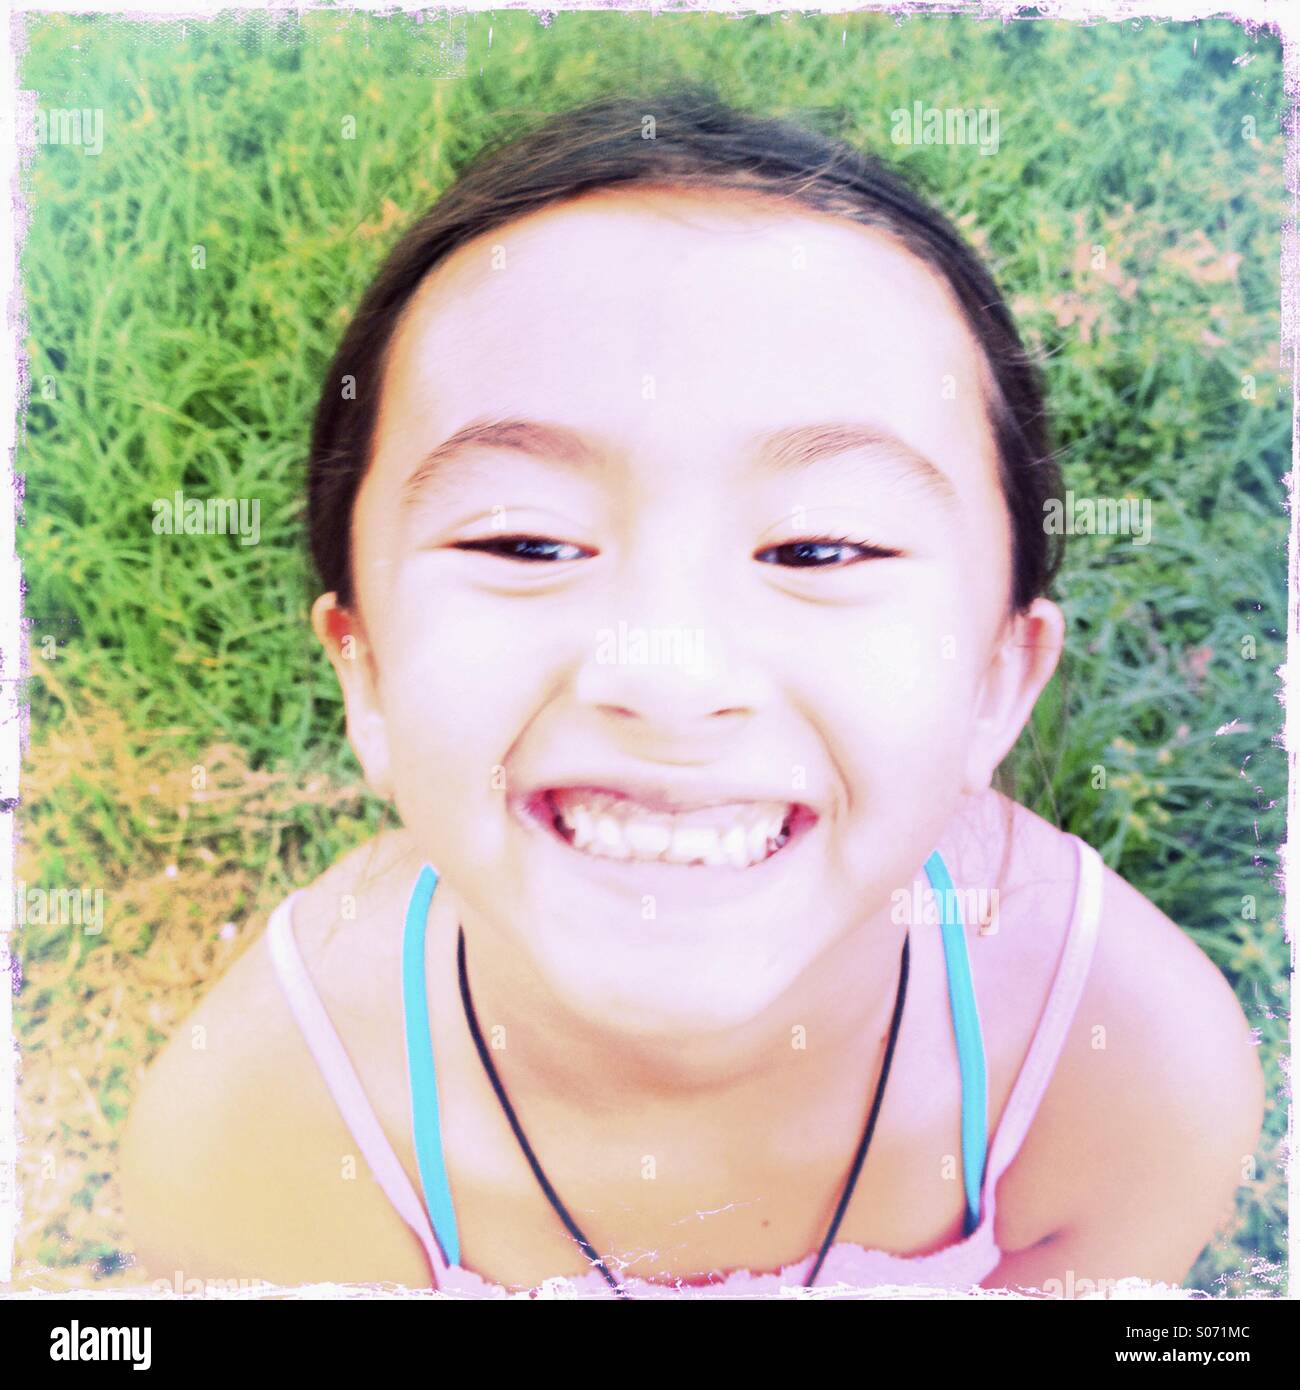 Close up portrait of a grinning sept ans Asian American girl. Banque D'Images